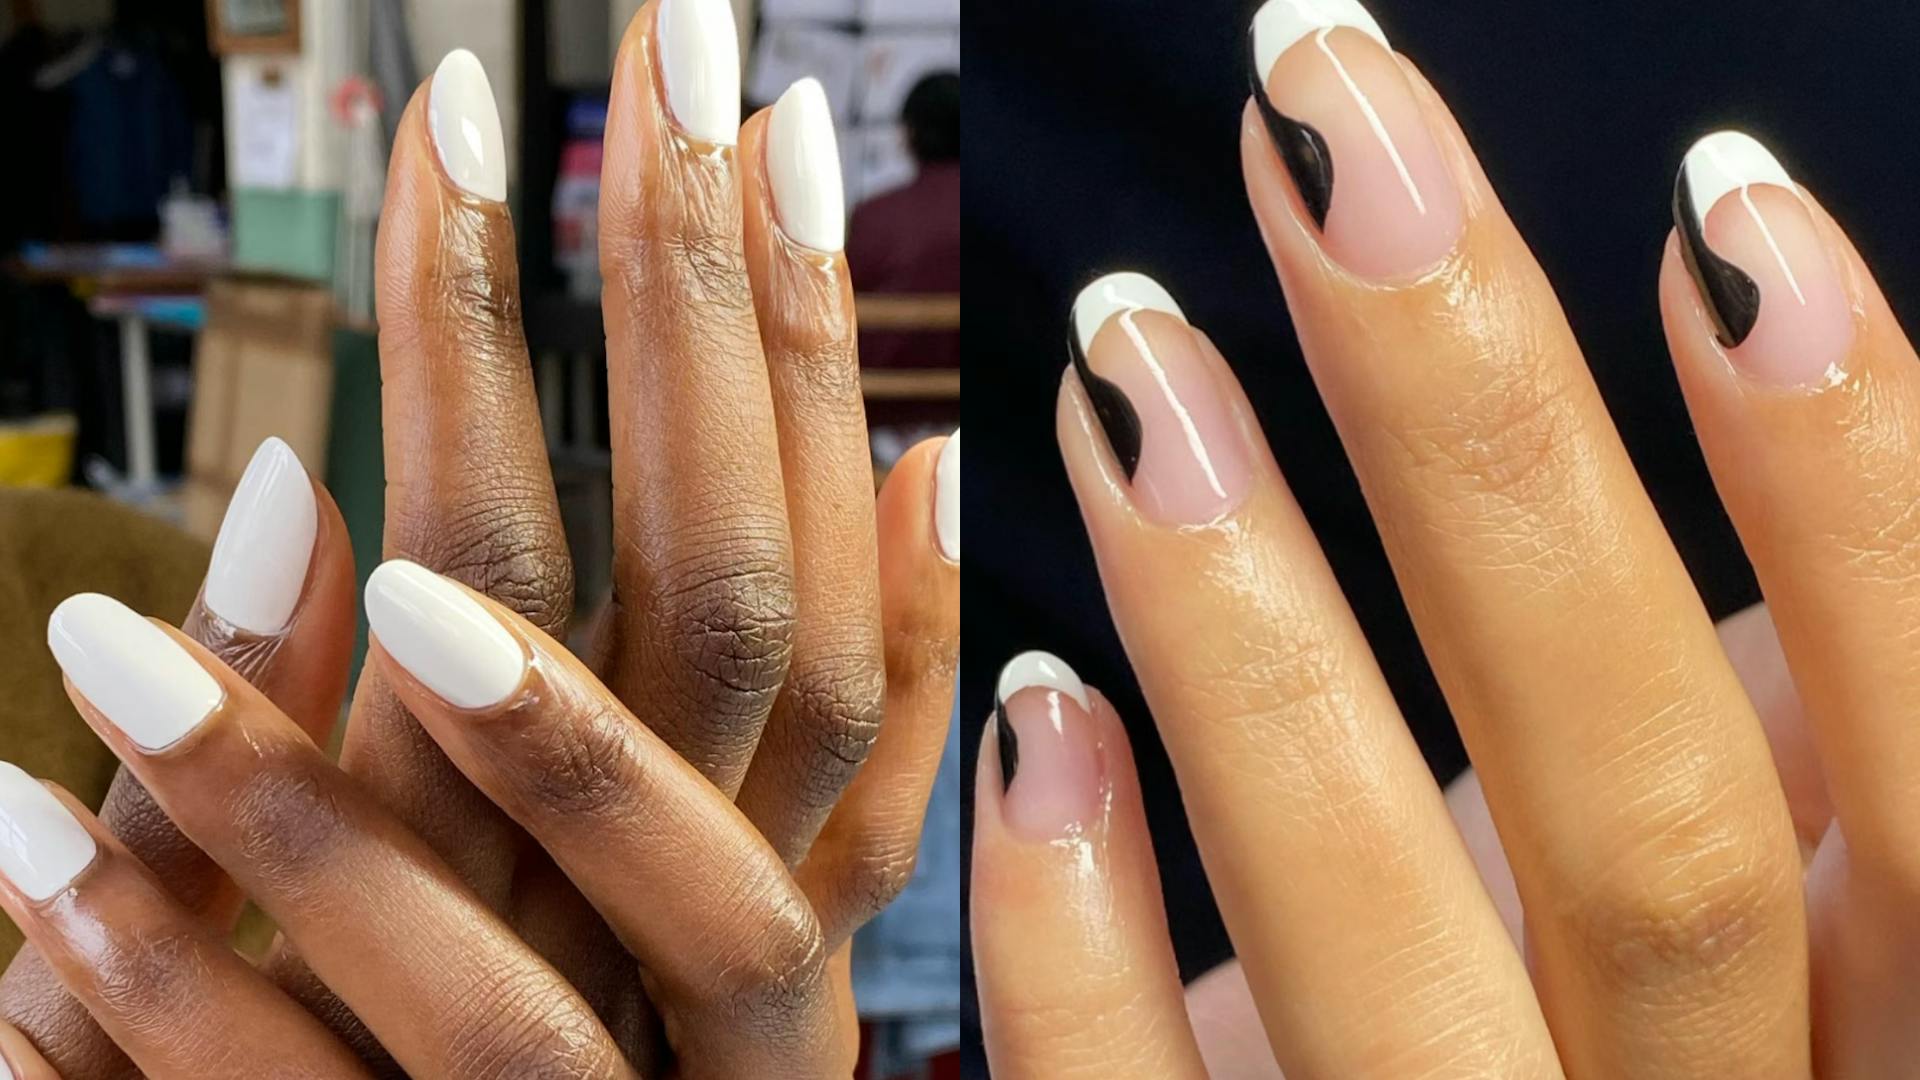 57 Pretty Nail Ideas The Nail Art Everyone's Loving – White and gold